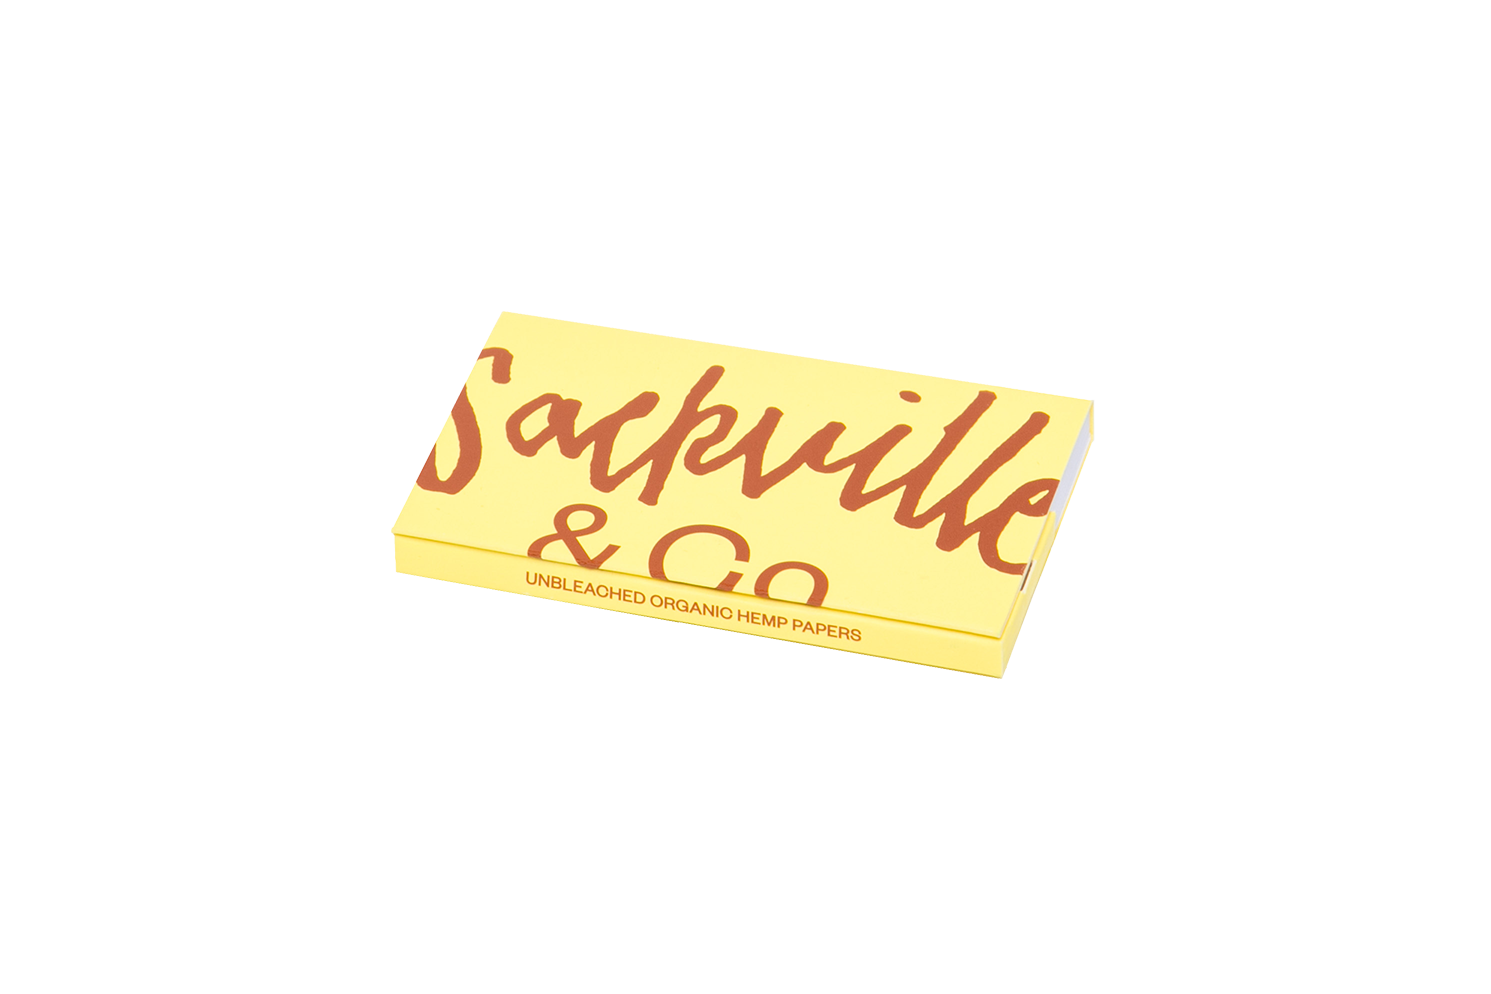 CASE - YELLOW ROLLING PAPERS - Sackville & Co.